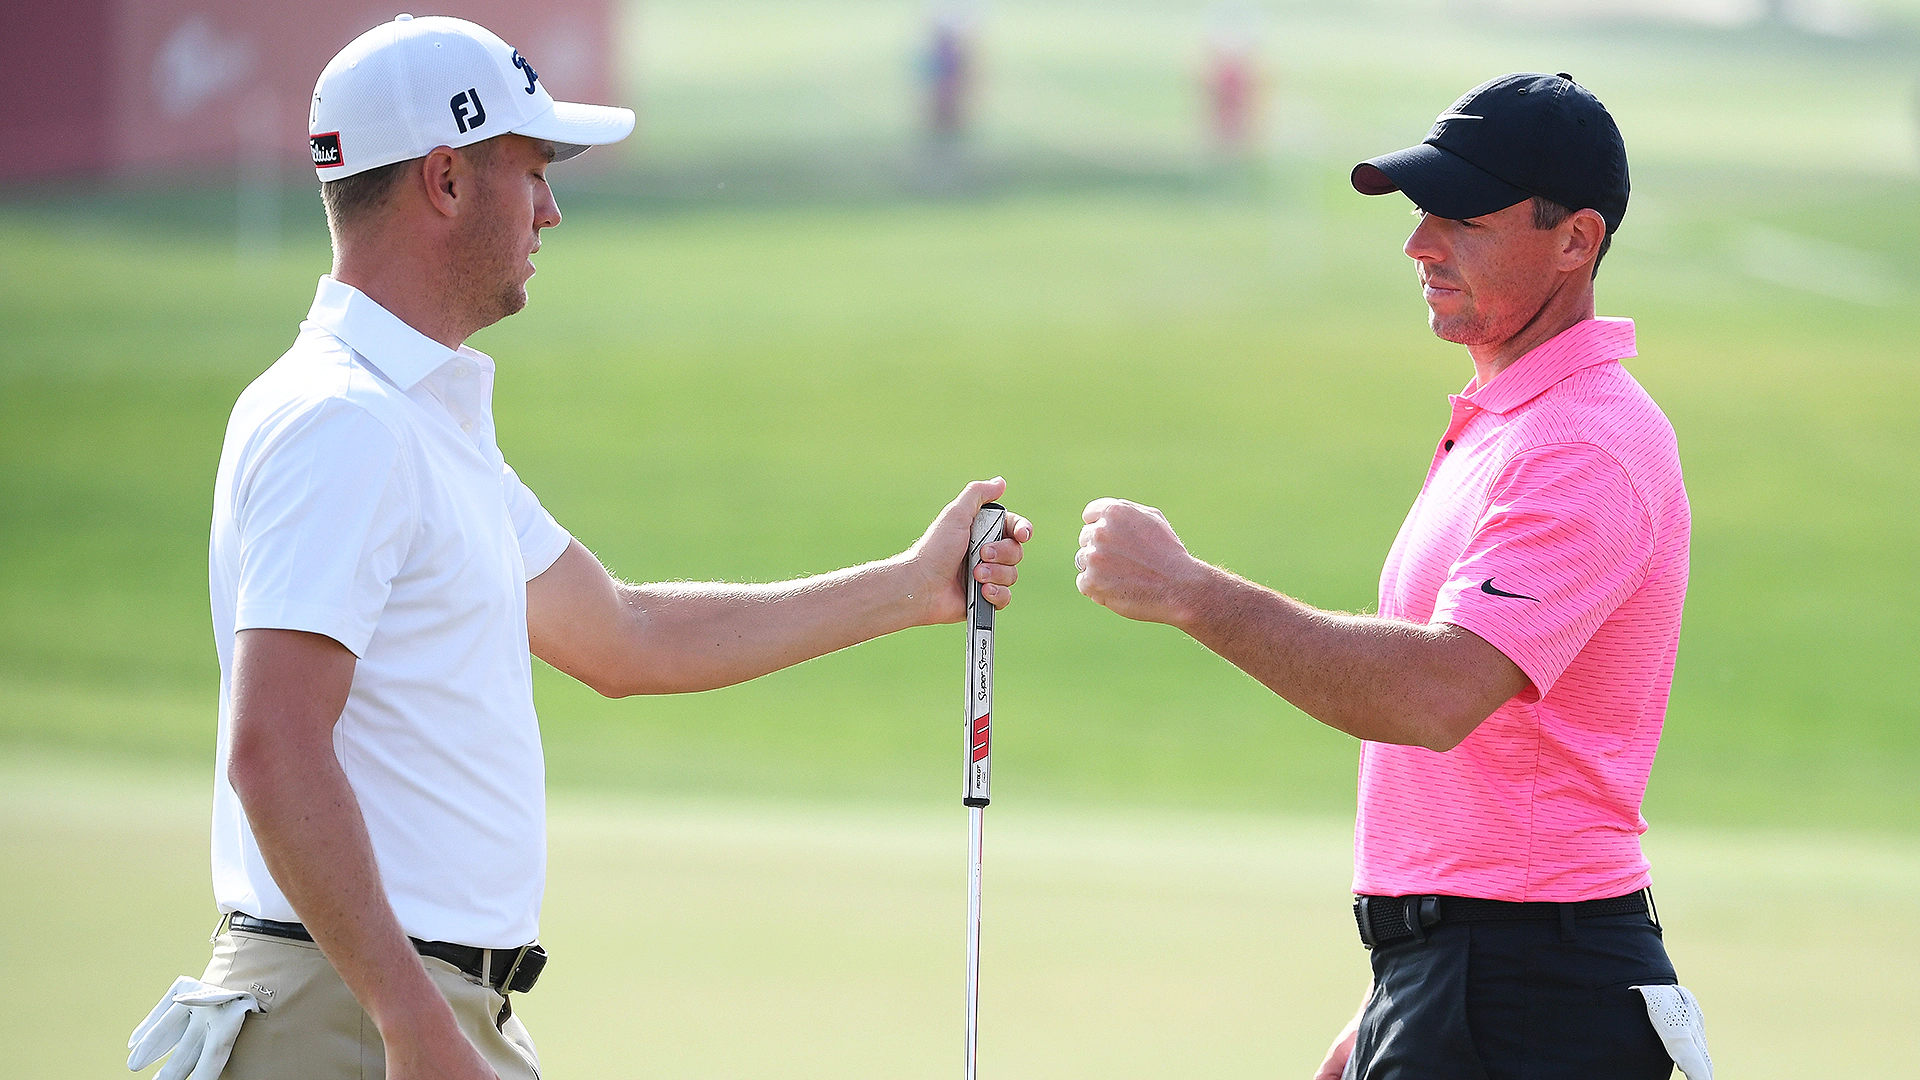 Watch: Can Justin Thomas and Rory McIlroy make an ace with 50 balls each?